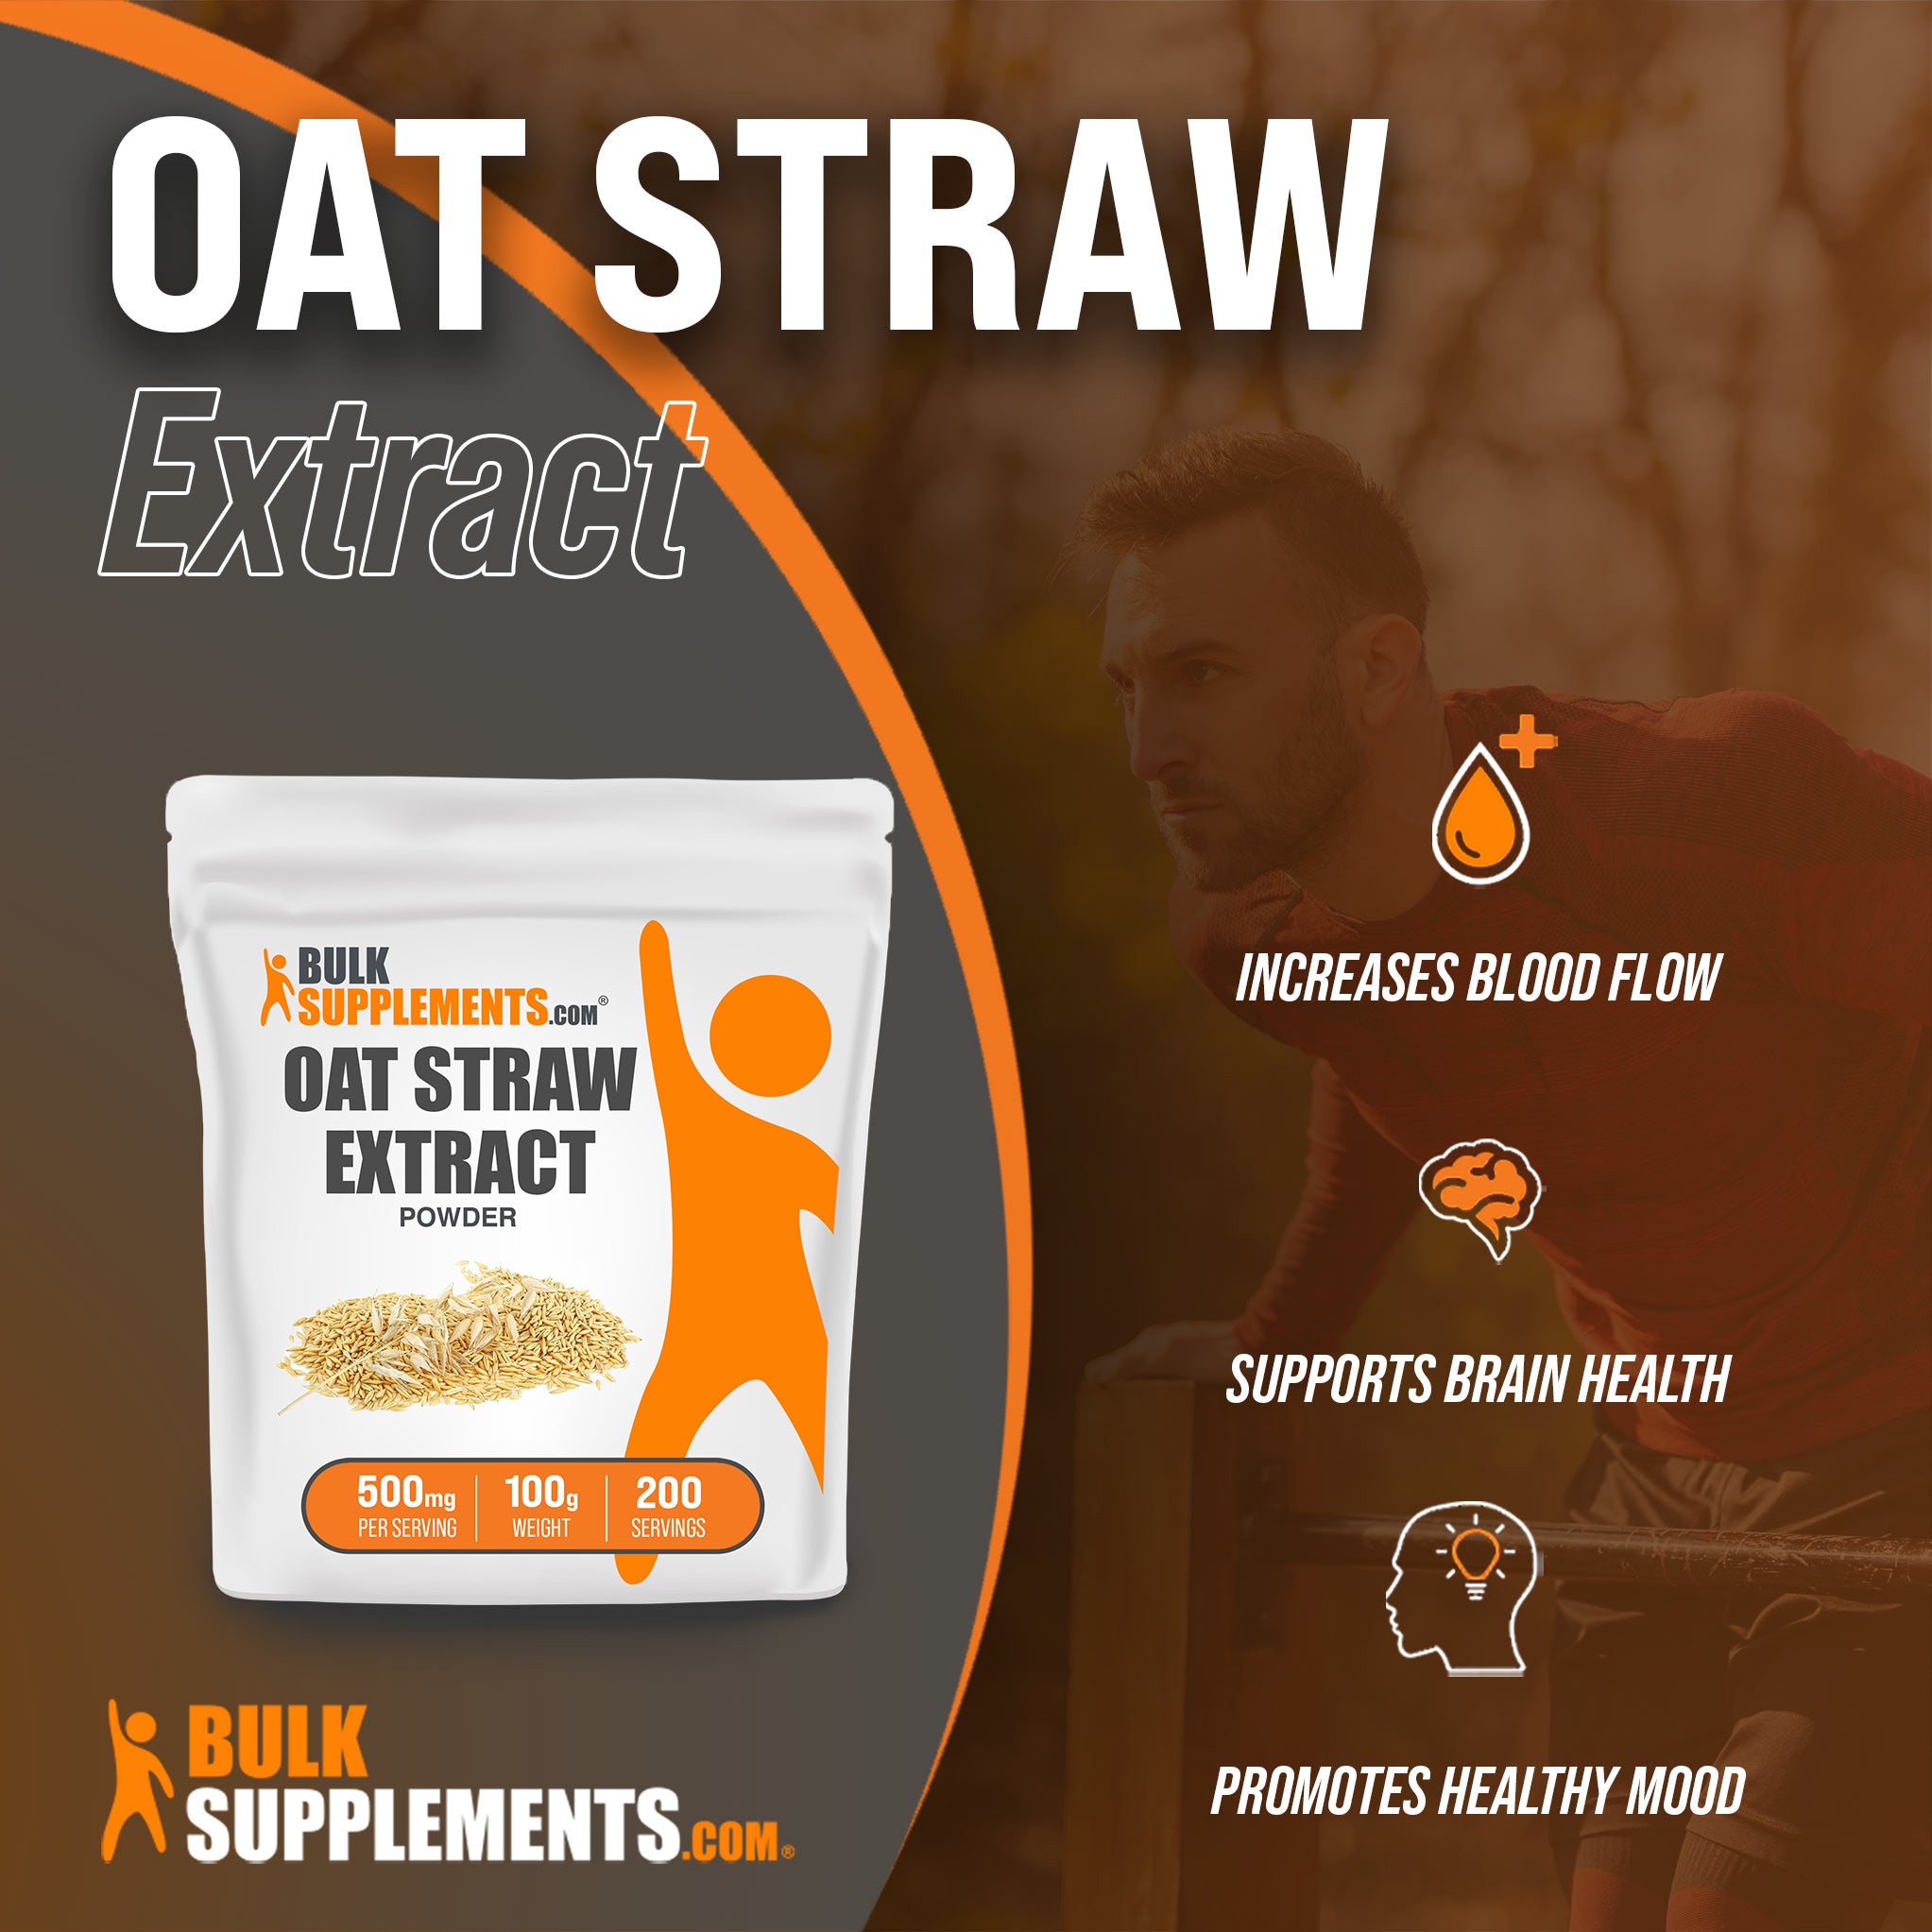 Benefits of Oat Straw Extract: increases blood flow, supports brain health, promotes healthy mood